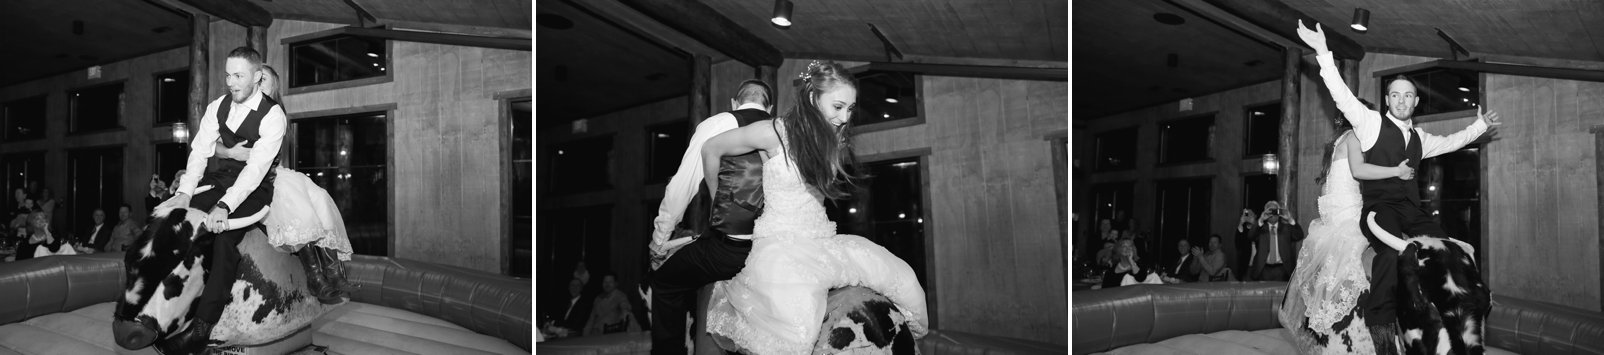 bull riding during reception at spruce mountain ranch wedding